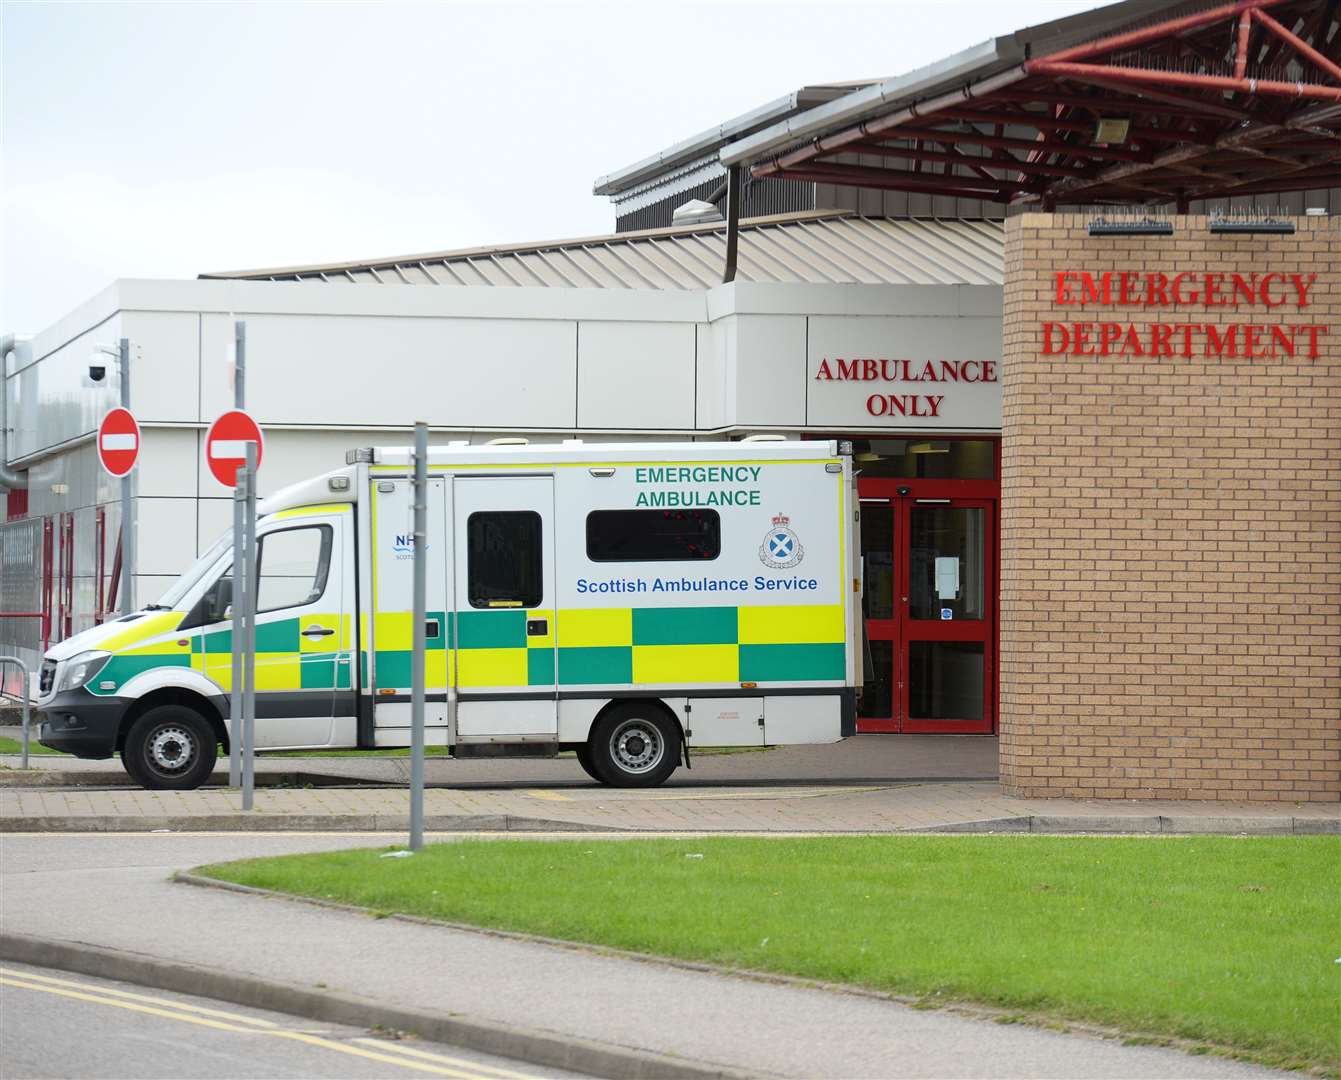 A paramedic has said it can take up to four hours for a patient to be admitted from an ambulance to hospital in Inverness.